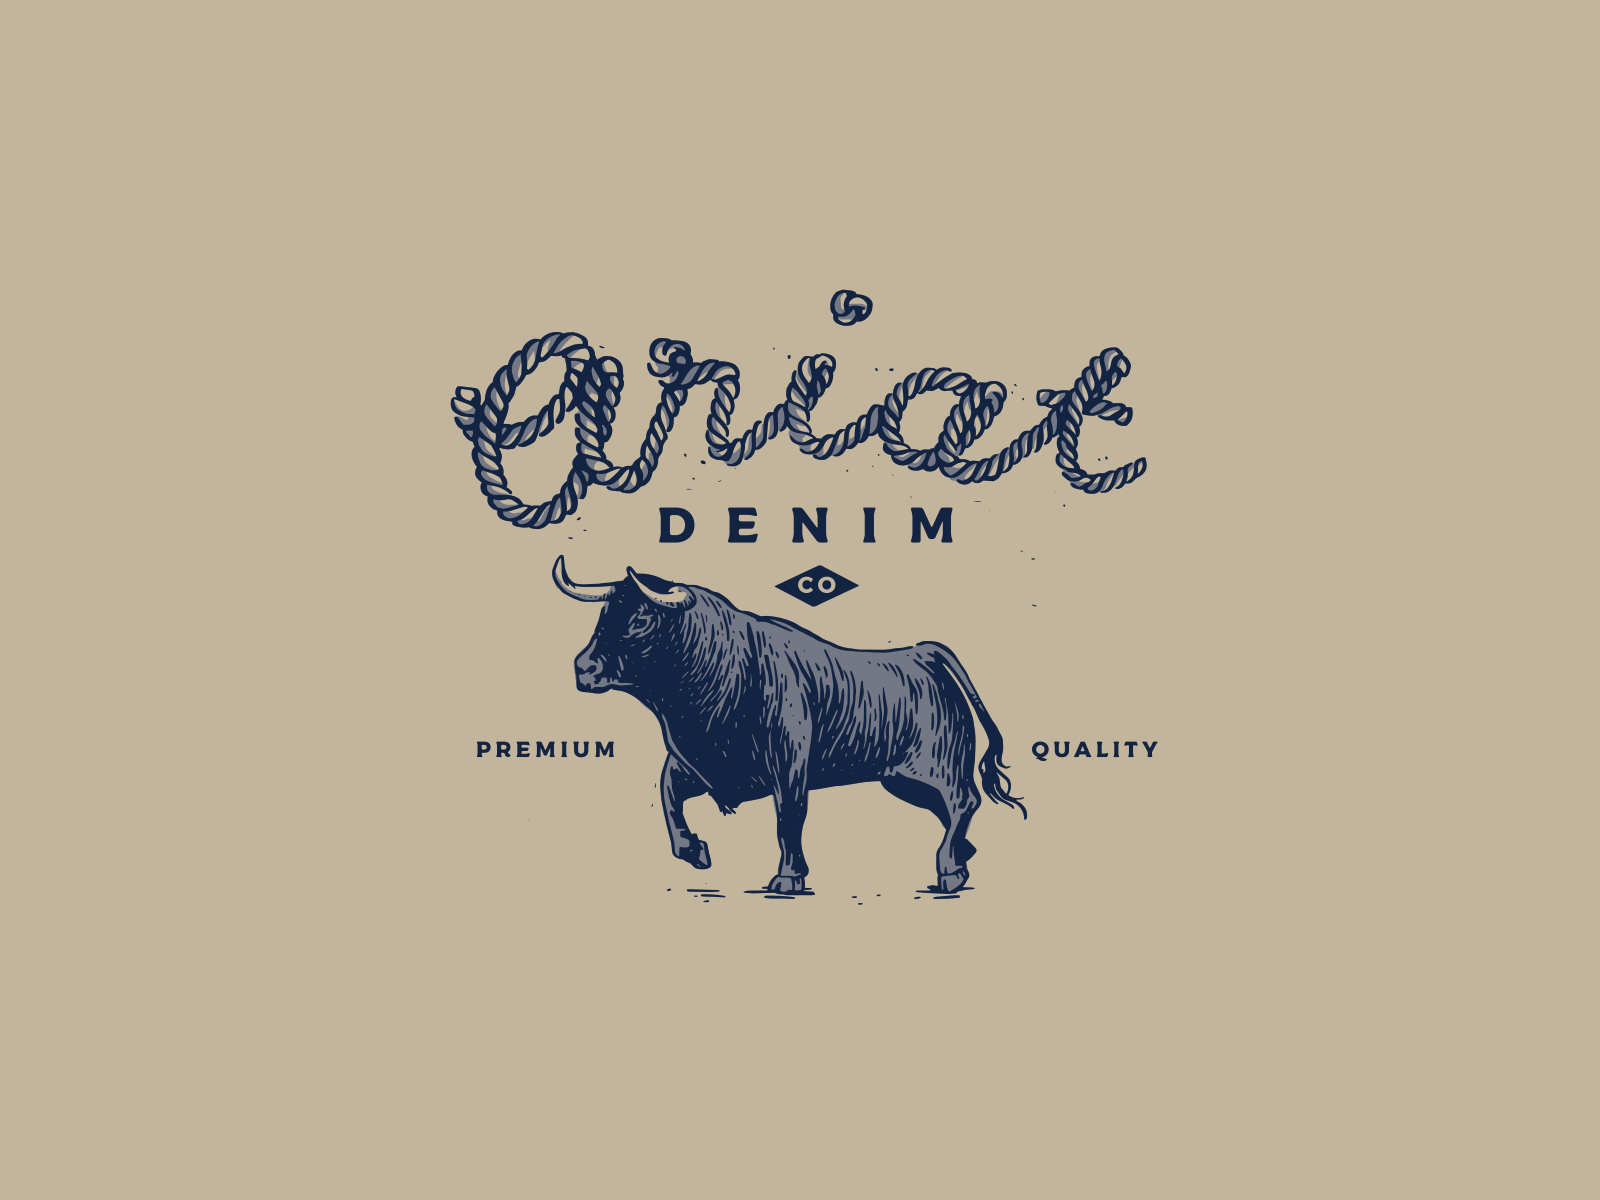 Ariat Rope And Bull By Adam Johnson On Dribbble